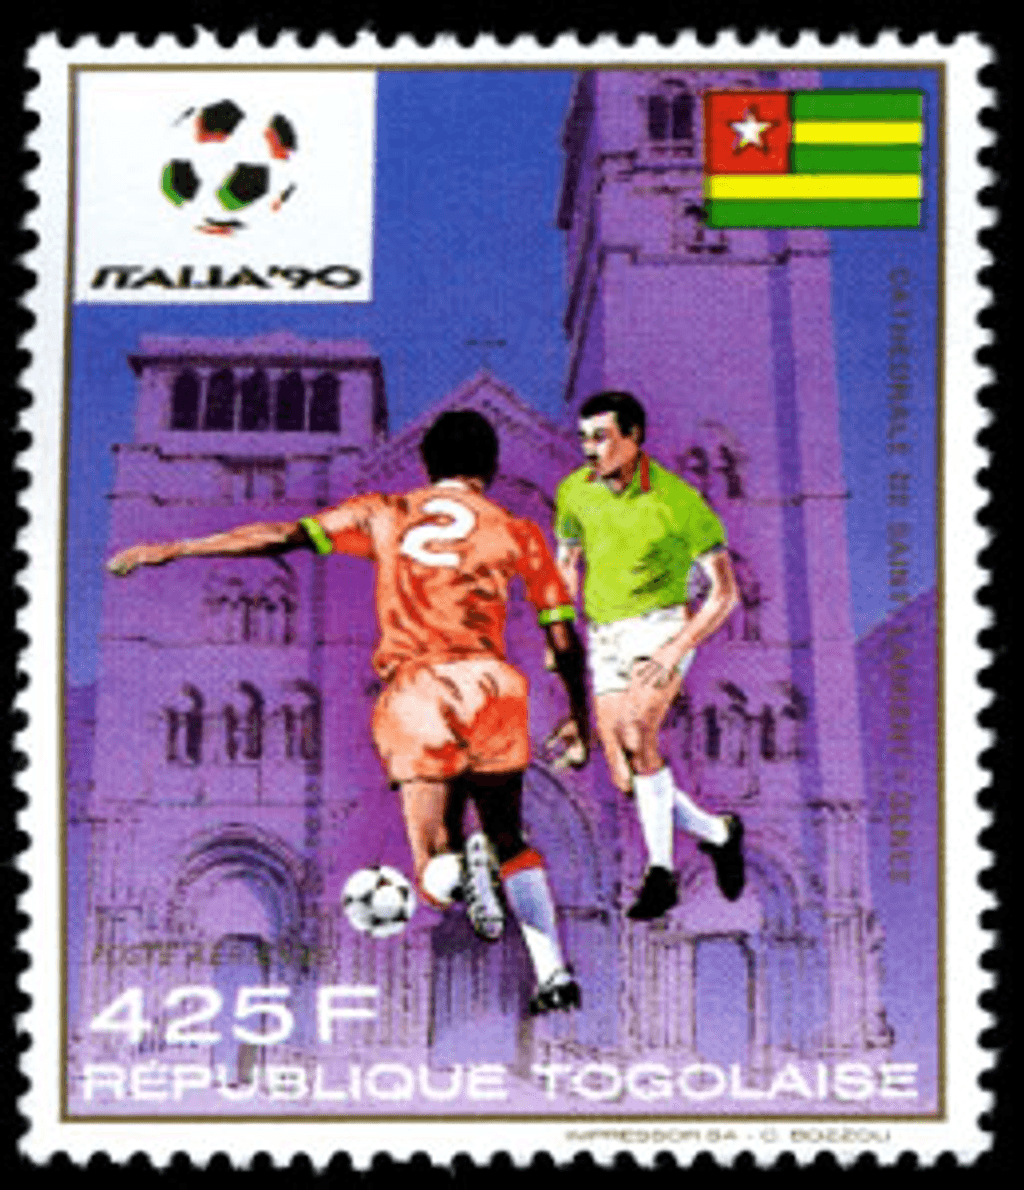 Football World Cup Italy 1990